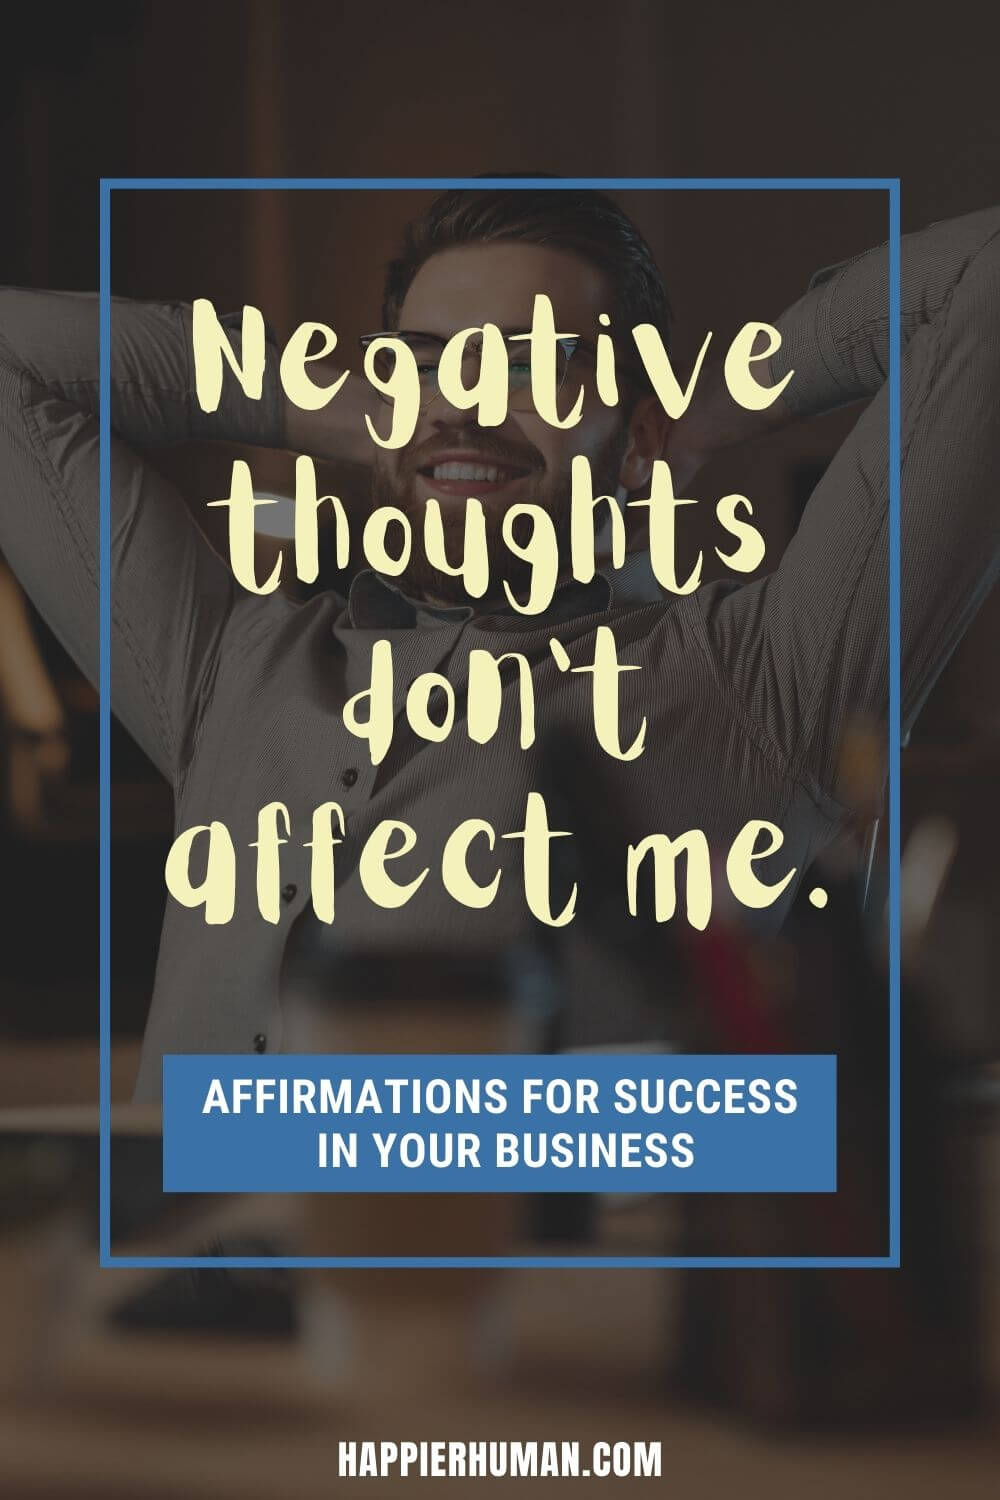 Affirmations for Success in Business - Negative thoughts don’t affect me. | affirmation for attracting clients | 10 affirmations for entrepreneurs | positive affirmations for success and wealth